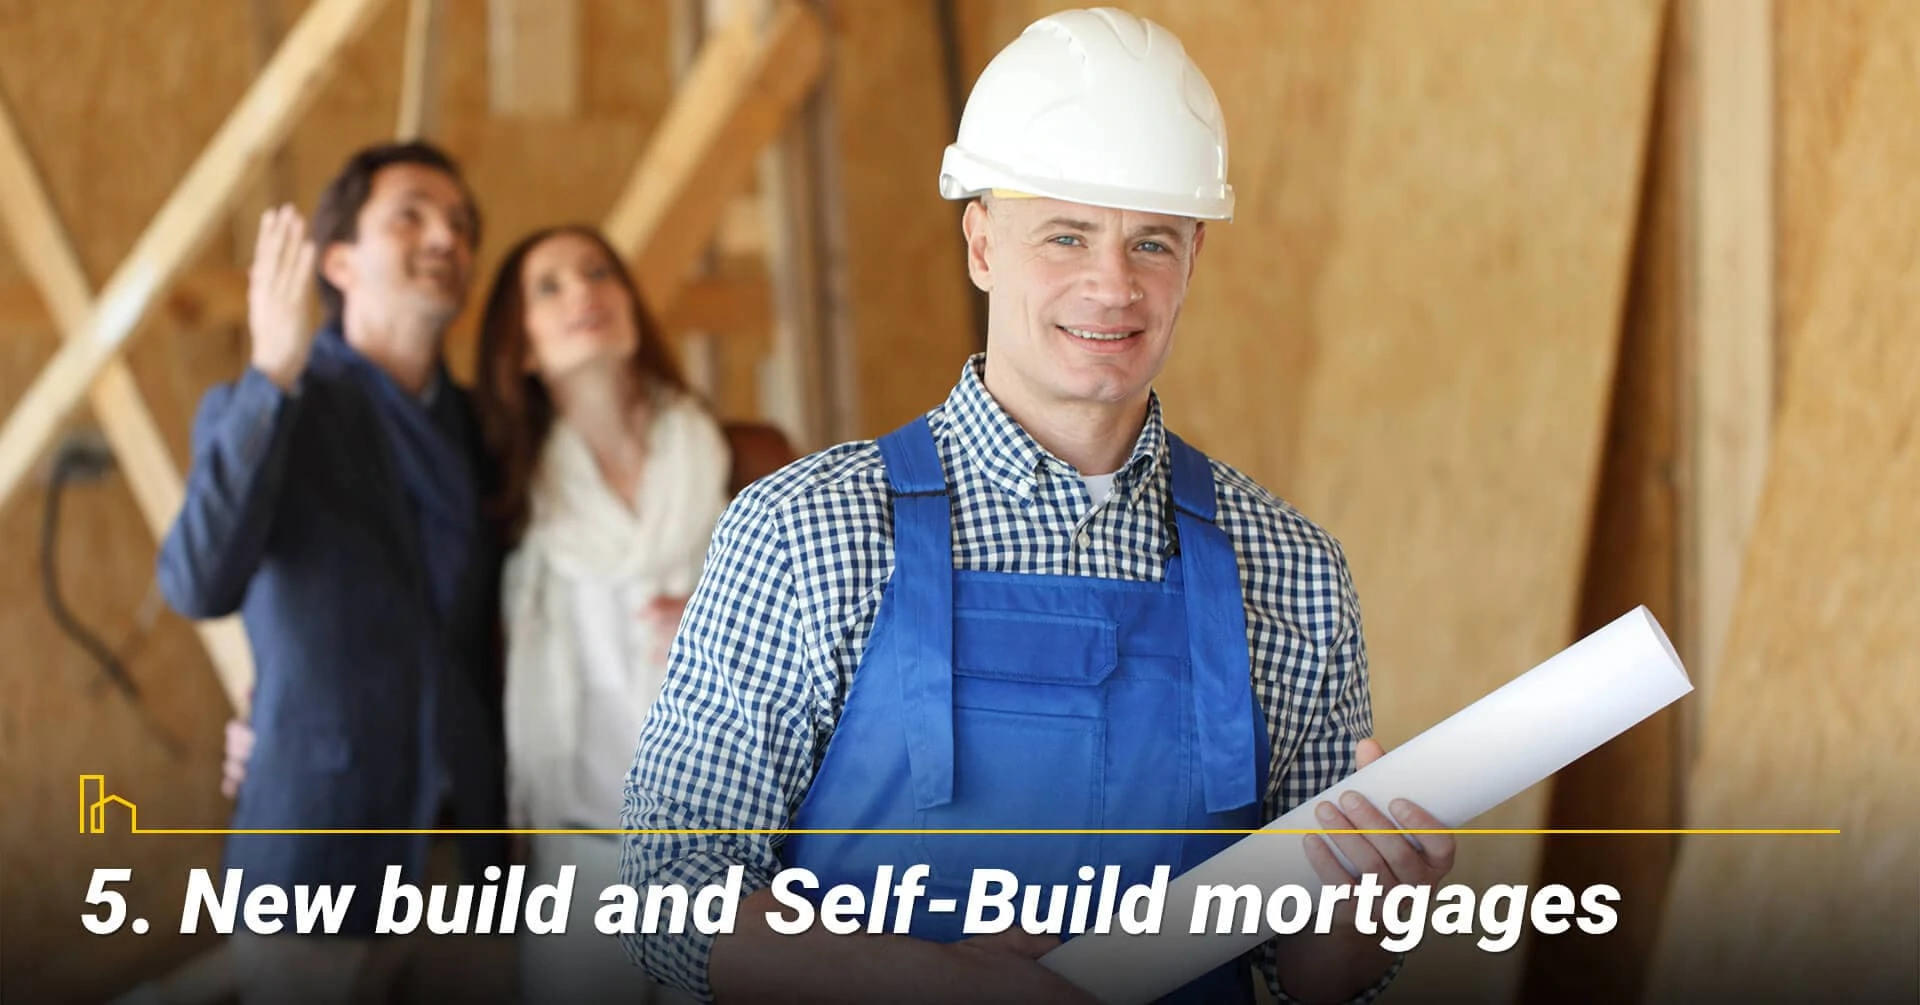 New build and Self-Build mortgages, different mortgages